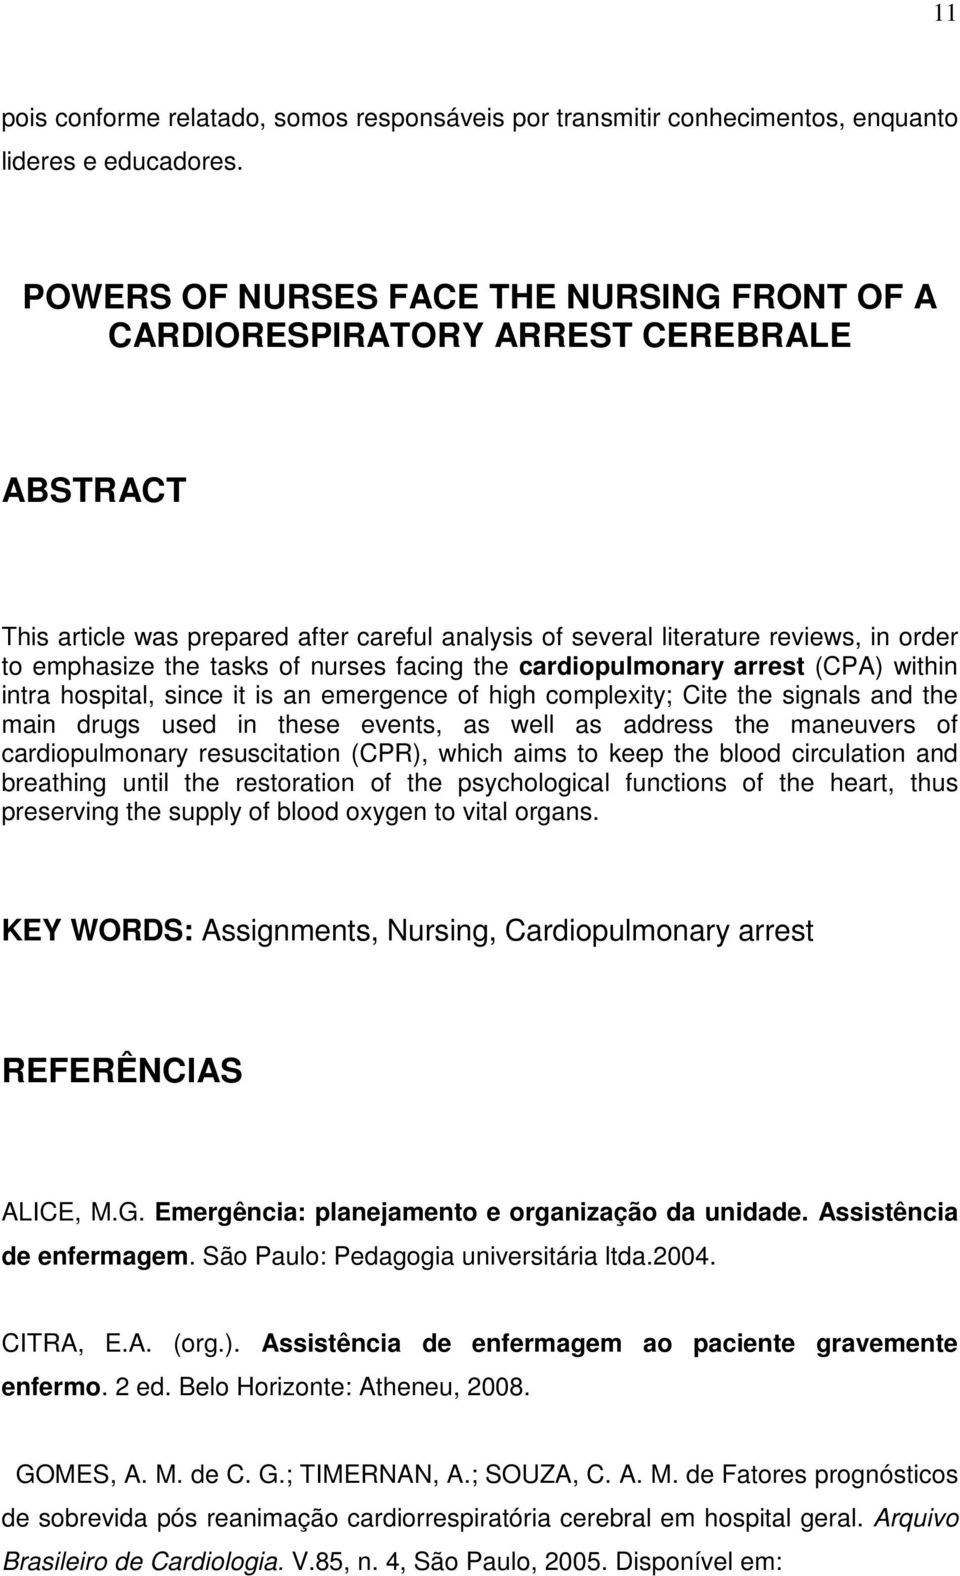 tasks of nurses facing the cardiopulmonary arrest (CPA) within intra hospital, since it is an emergence of high complexity; Cite the signals and the main drugs used in these events, as well as